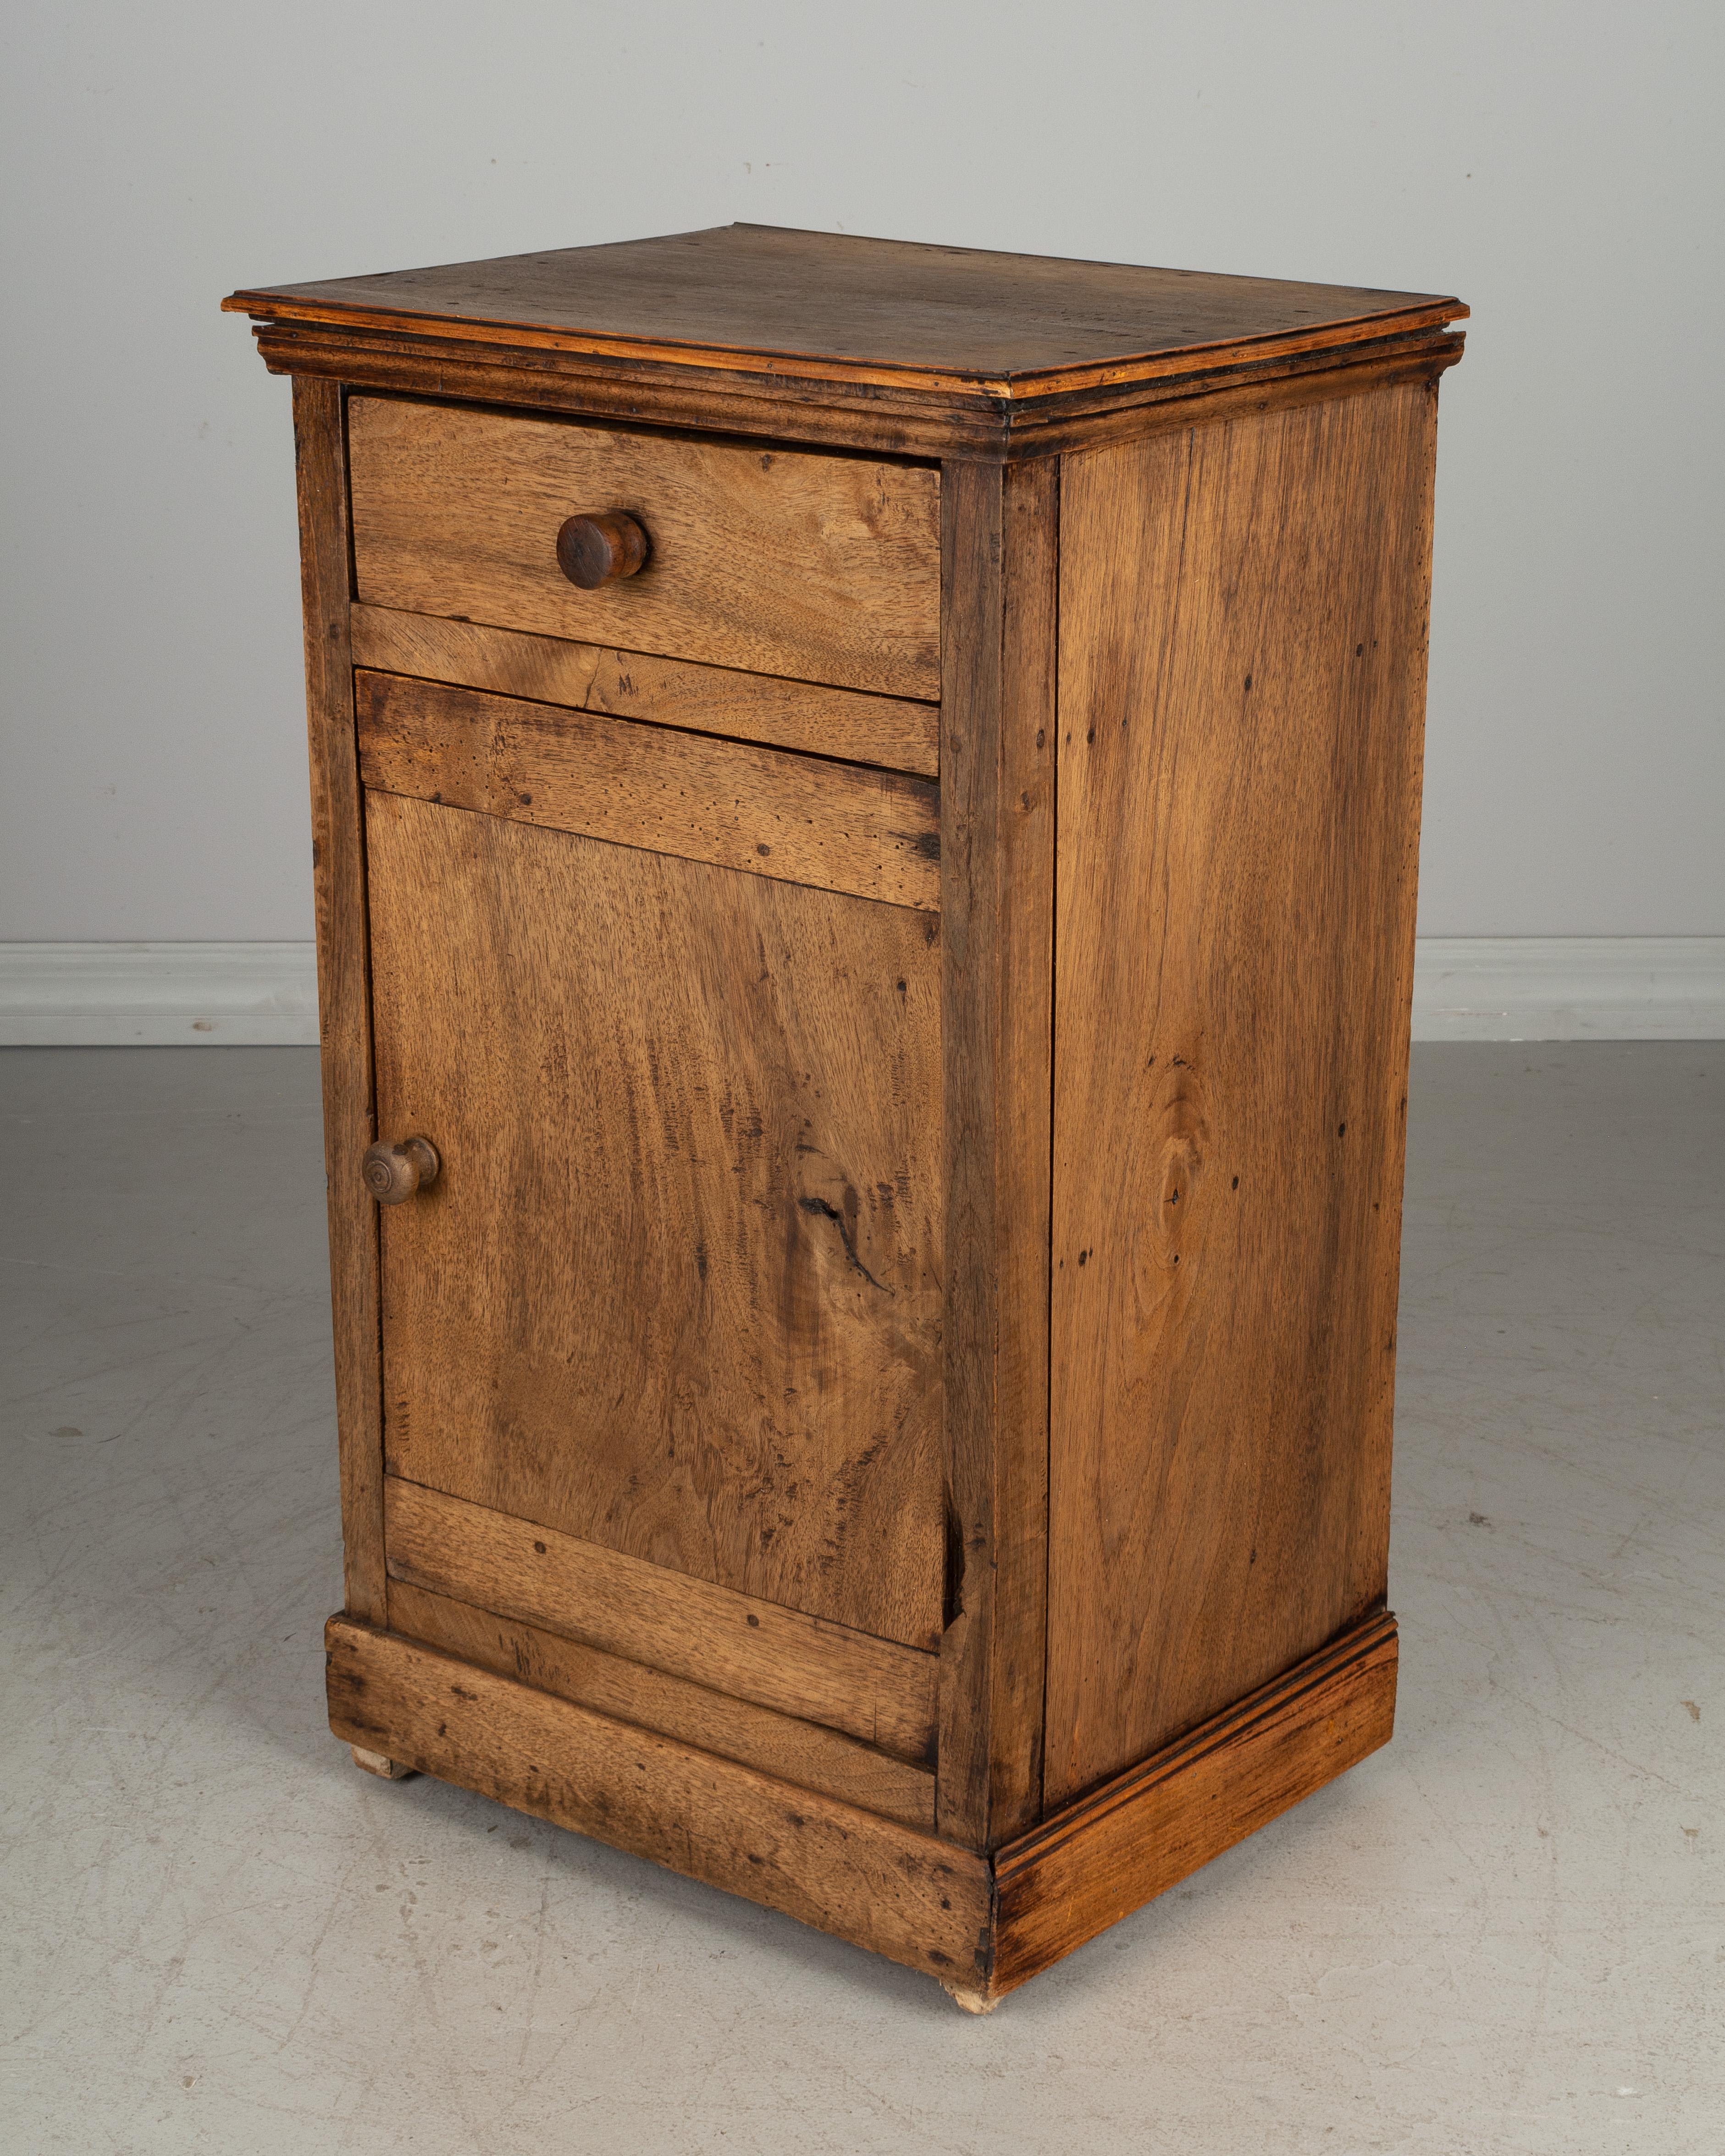 A rustic Country French side table or nightstand made of thick planks of solid walnut with faded distressed finish. Small dovetailed drawer above a cabinet door opening to one shelf. Large turned wood knobs. Please refer to photos for more details.